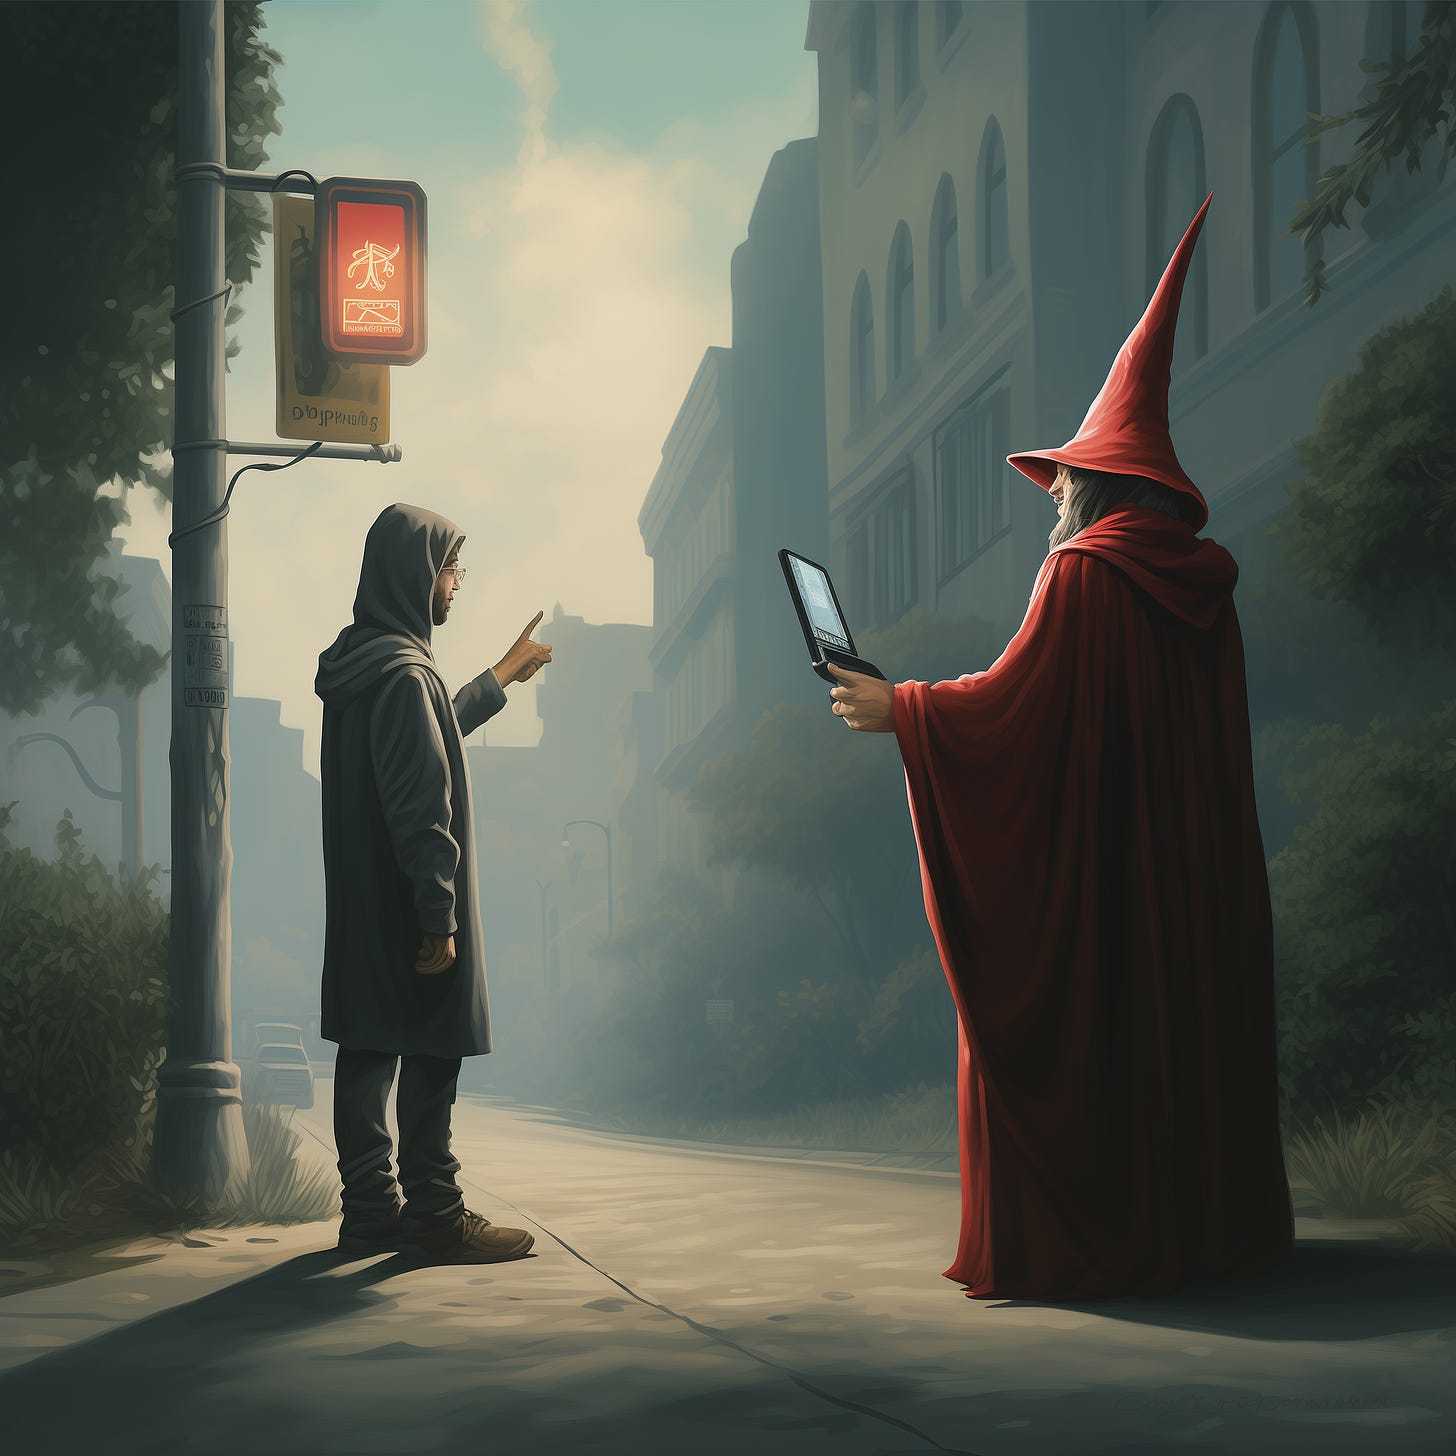 A red robed wizard with a pointy hat offering a laptop to a lost young man on an urban cross-roads.